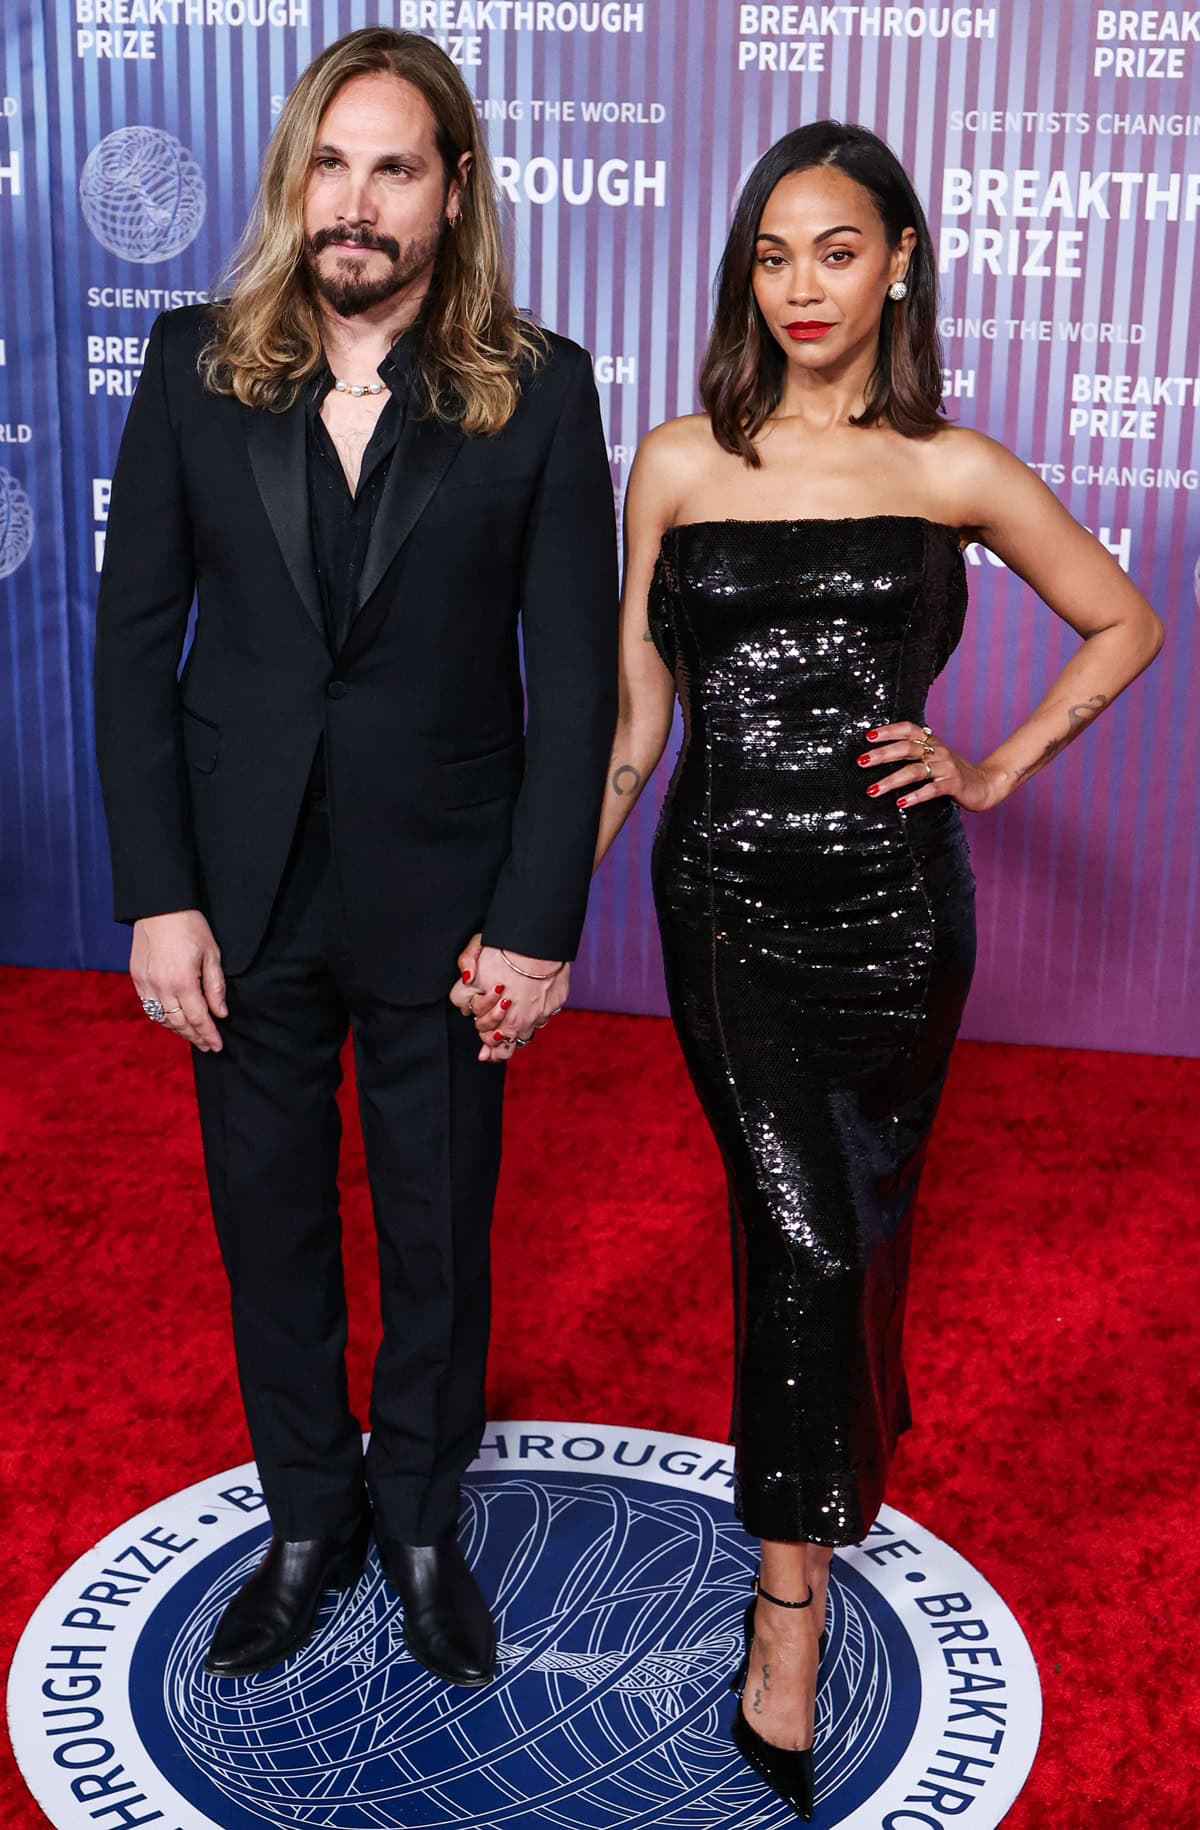 Zoe Saldana, poised and elegant next to Marco Perego, attends the 10th Annual Breakthrough Prize Ceremony